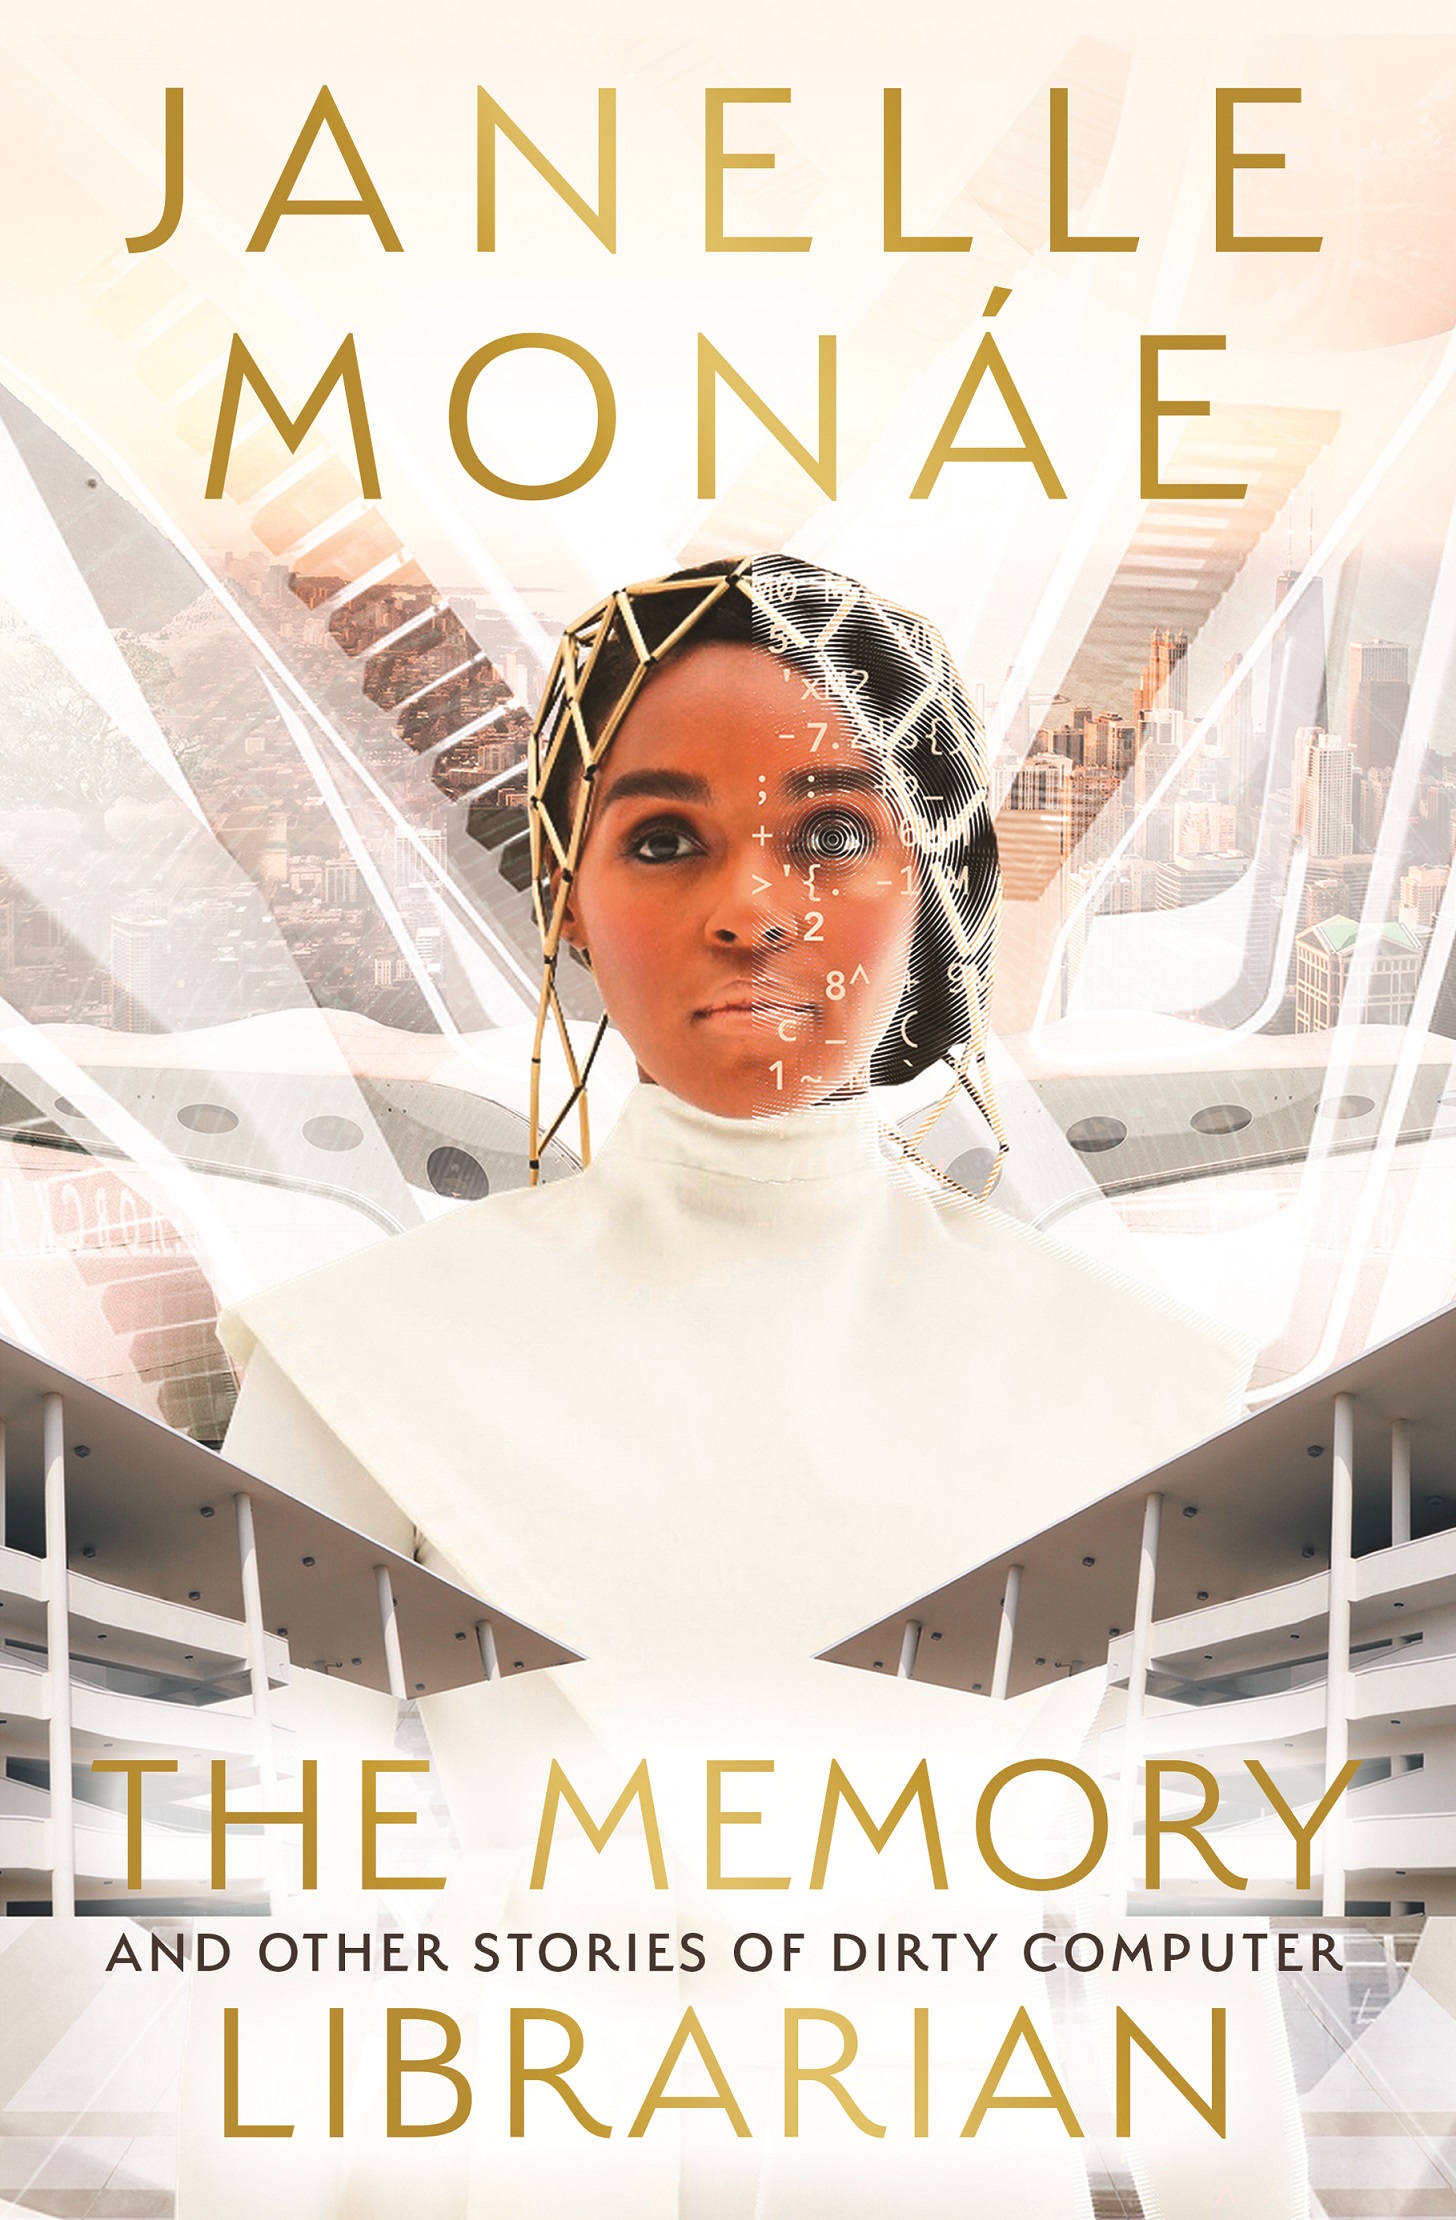 Janelle Monae-Memory Librarian book cover